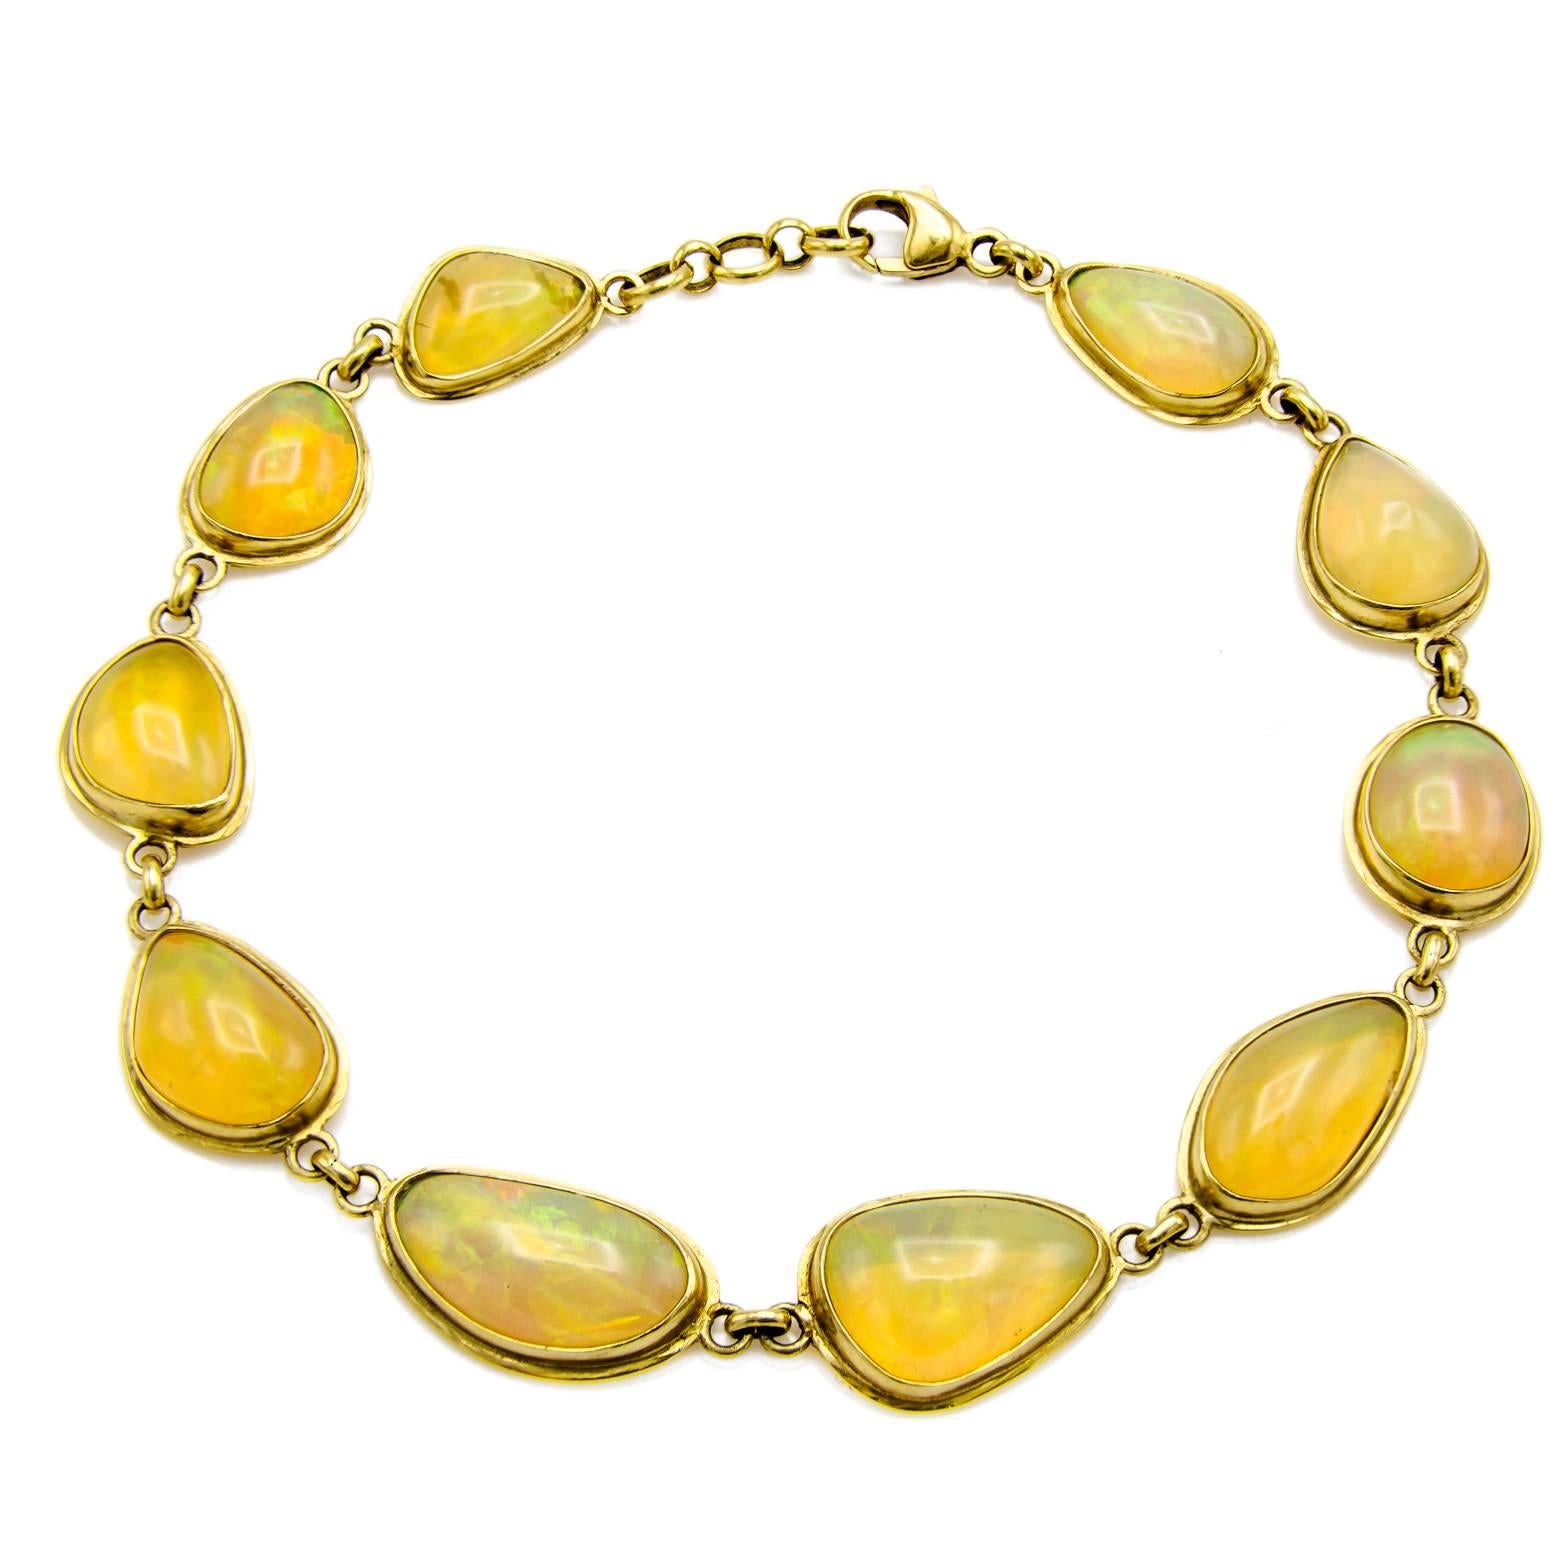 10 large stunning opals make up this 18K gold bracelet. In many different shapes and sizes with an opalescence that is almost impossible to capture on camera this magical opal bracelet brings elegance to a whole new level. Golds, fiery reds and